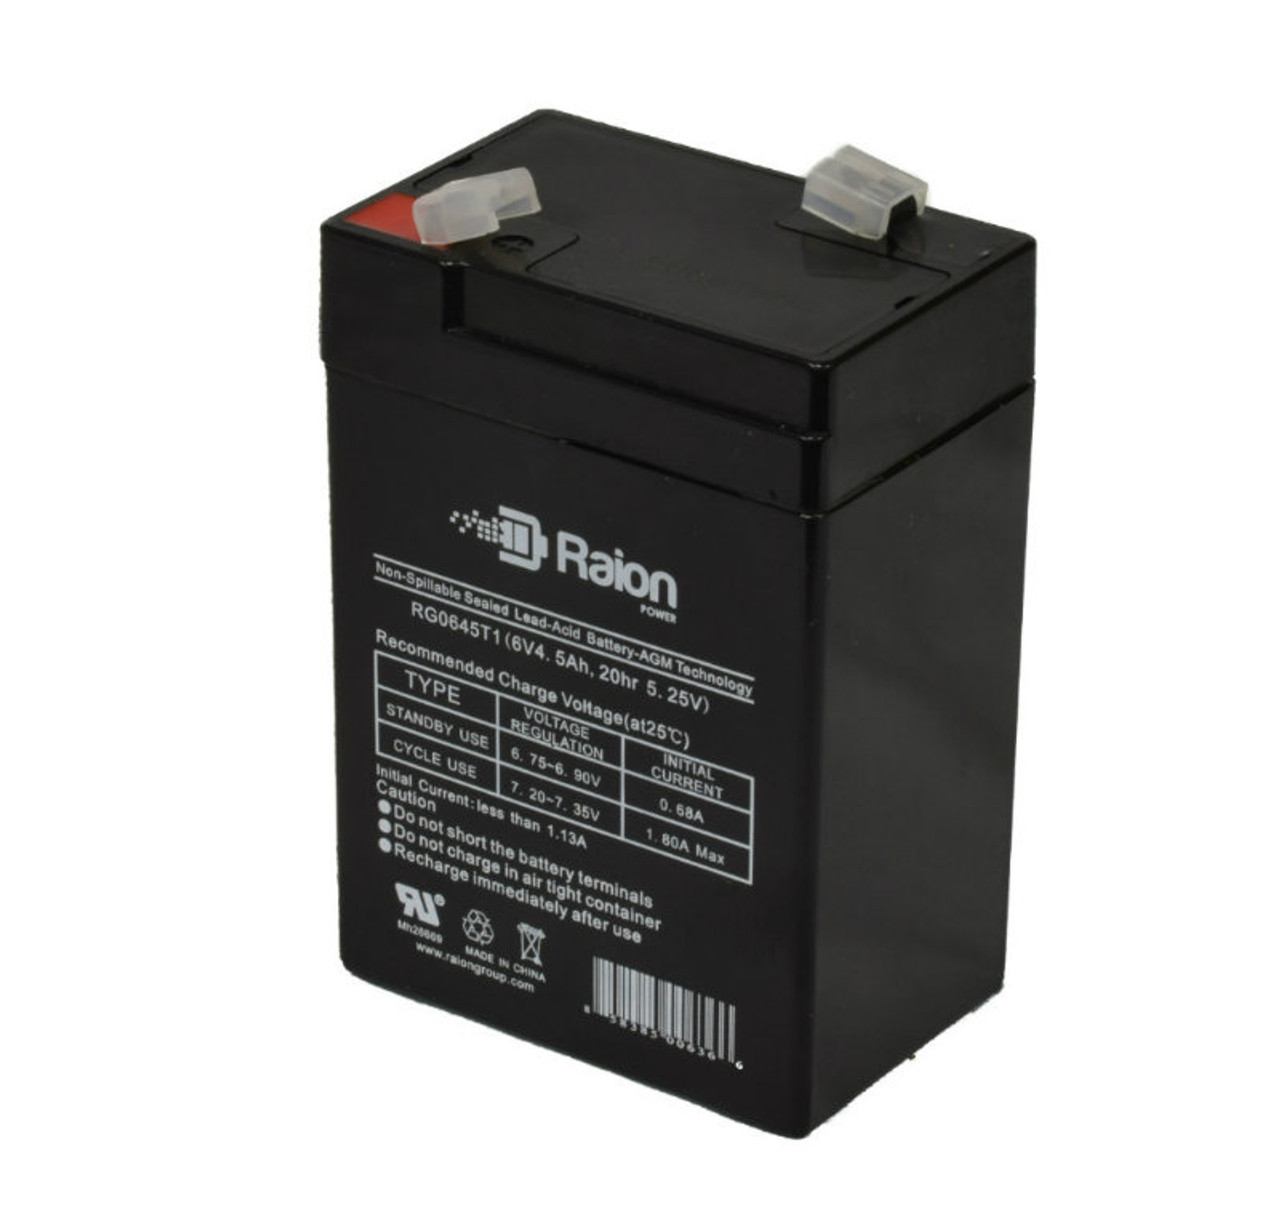 Raion Power RG0645T1 6V 4.5Ah Replacement Battery Cartridge for LongWay 3FM4.5